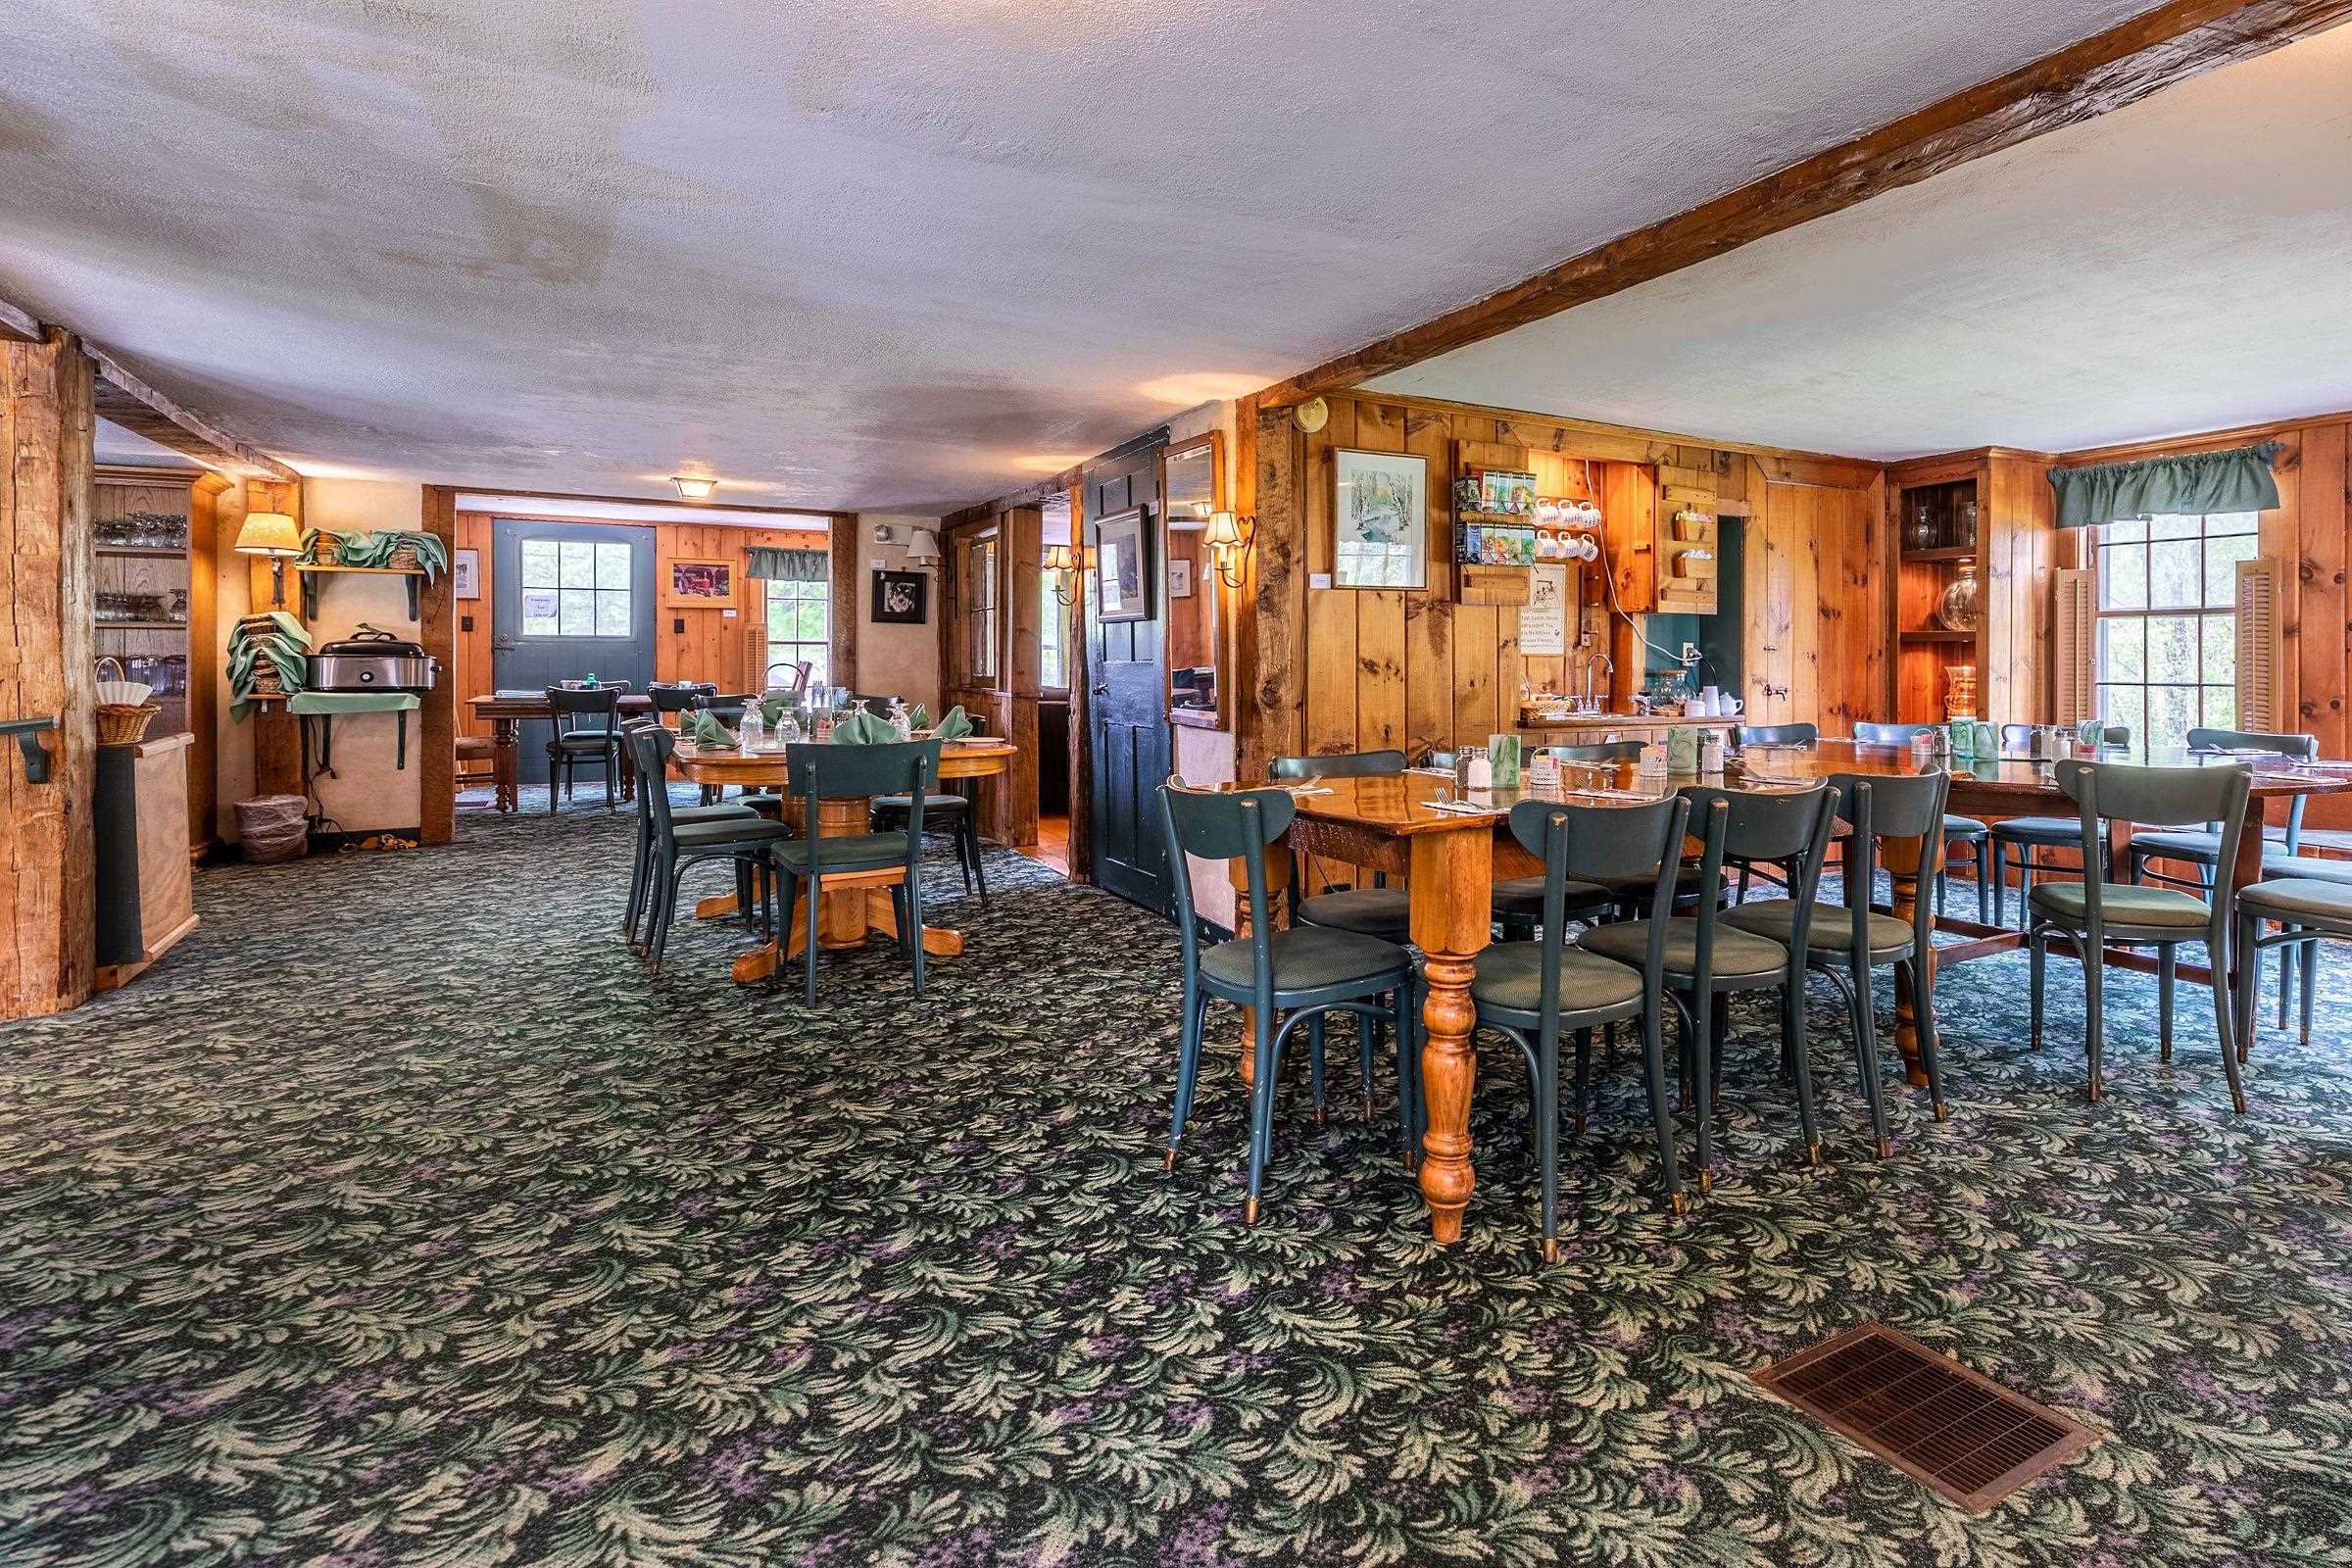 Great food, friendly service and a relaxed atmosphere are the hallmarks of the Inn